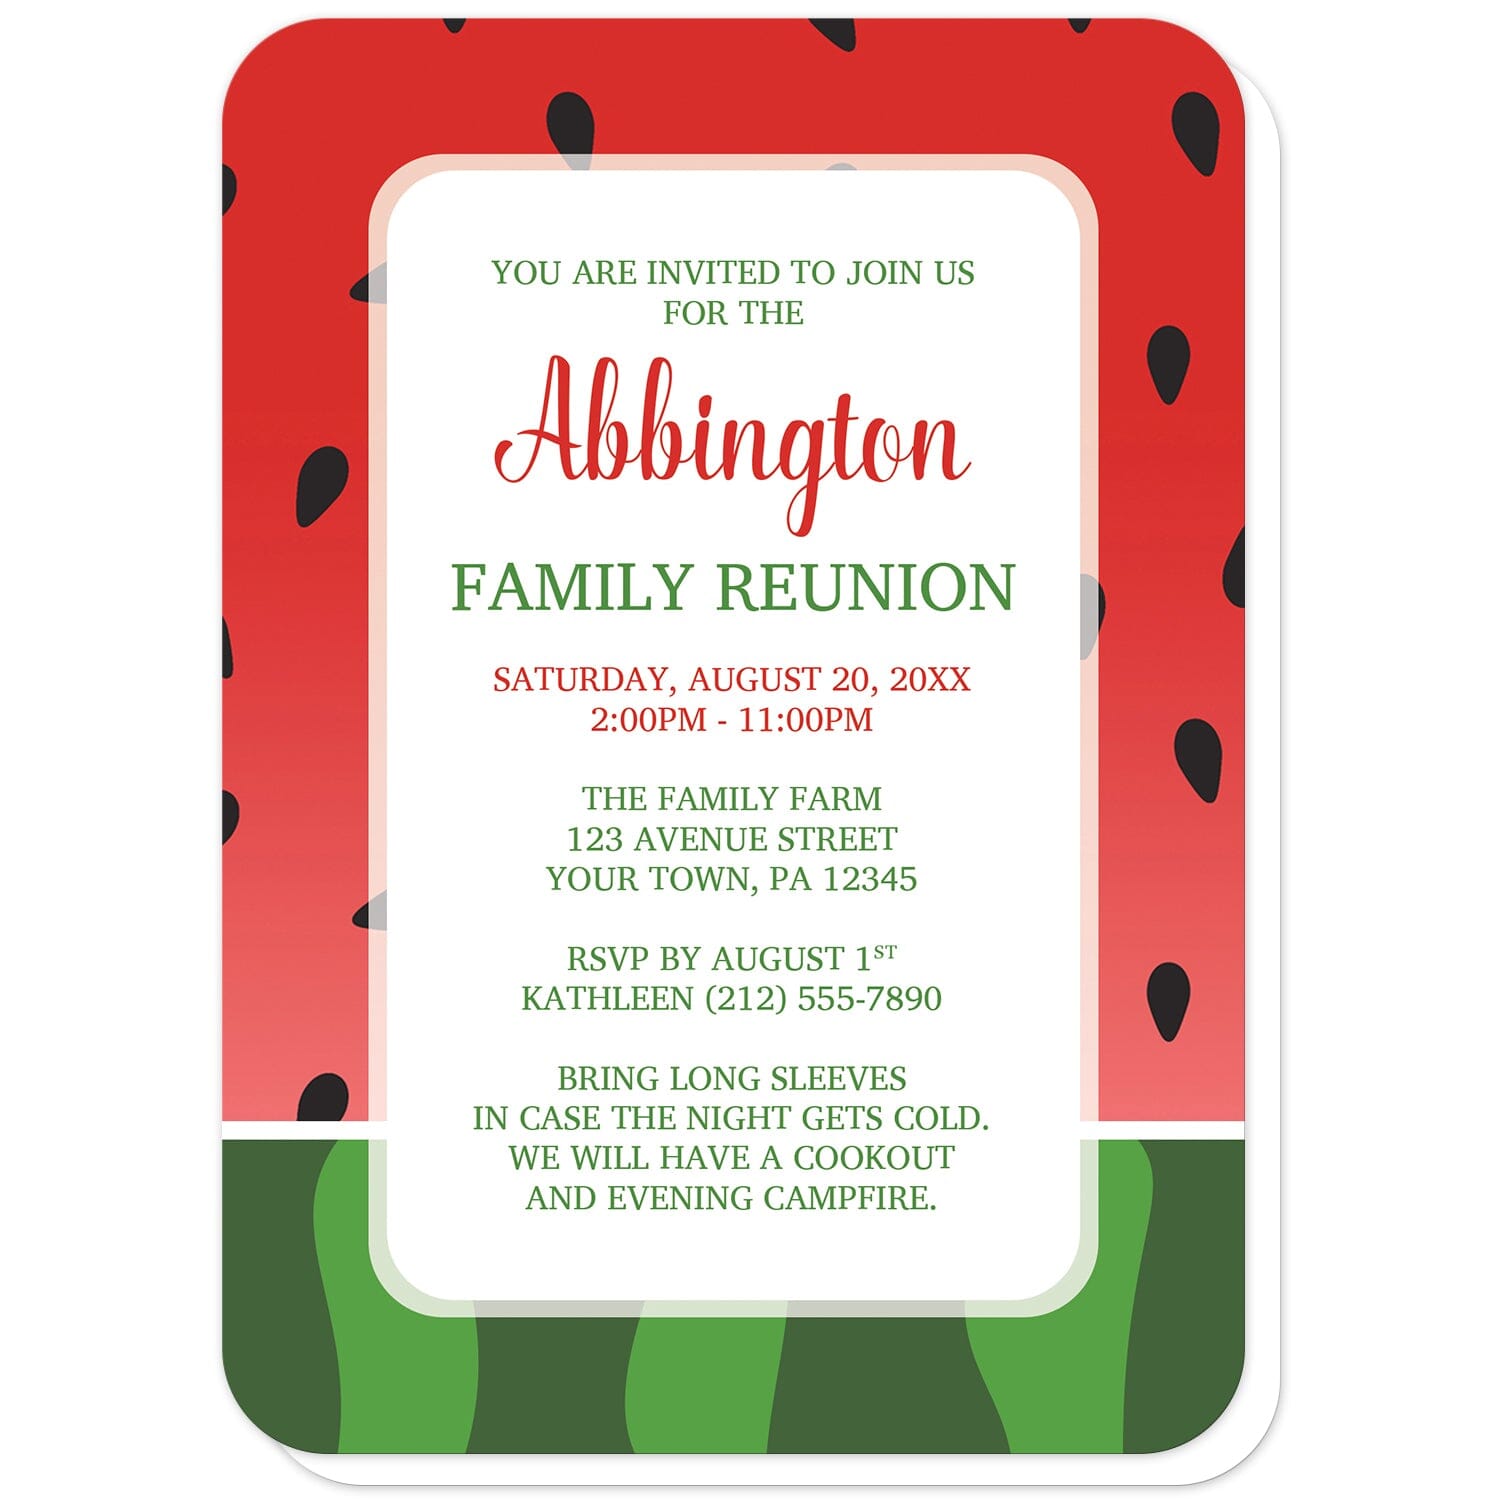 Red and Green Watermelon Family Reunion Invitations (with rounded corners) at Artistically Invited. Red and green watermelon family reunion invitations designed with a yummy-looking watermelon background design. Your personalized family reunion celebration details are custom printed in red and green over white centered in the middle of the invitations over the background illustration.